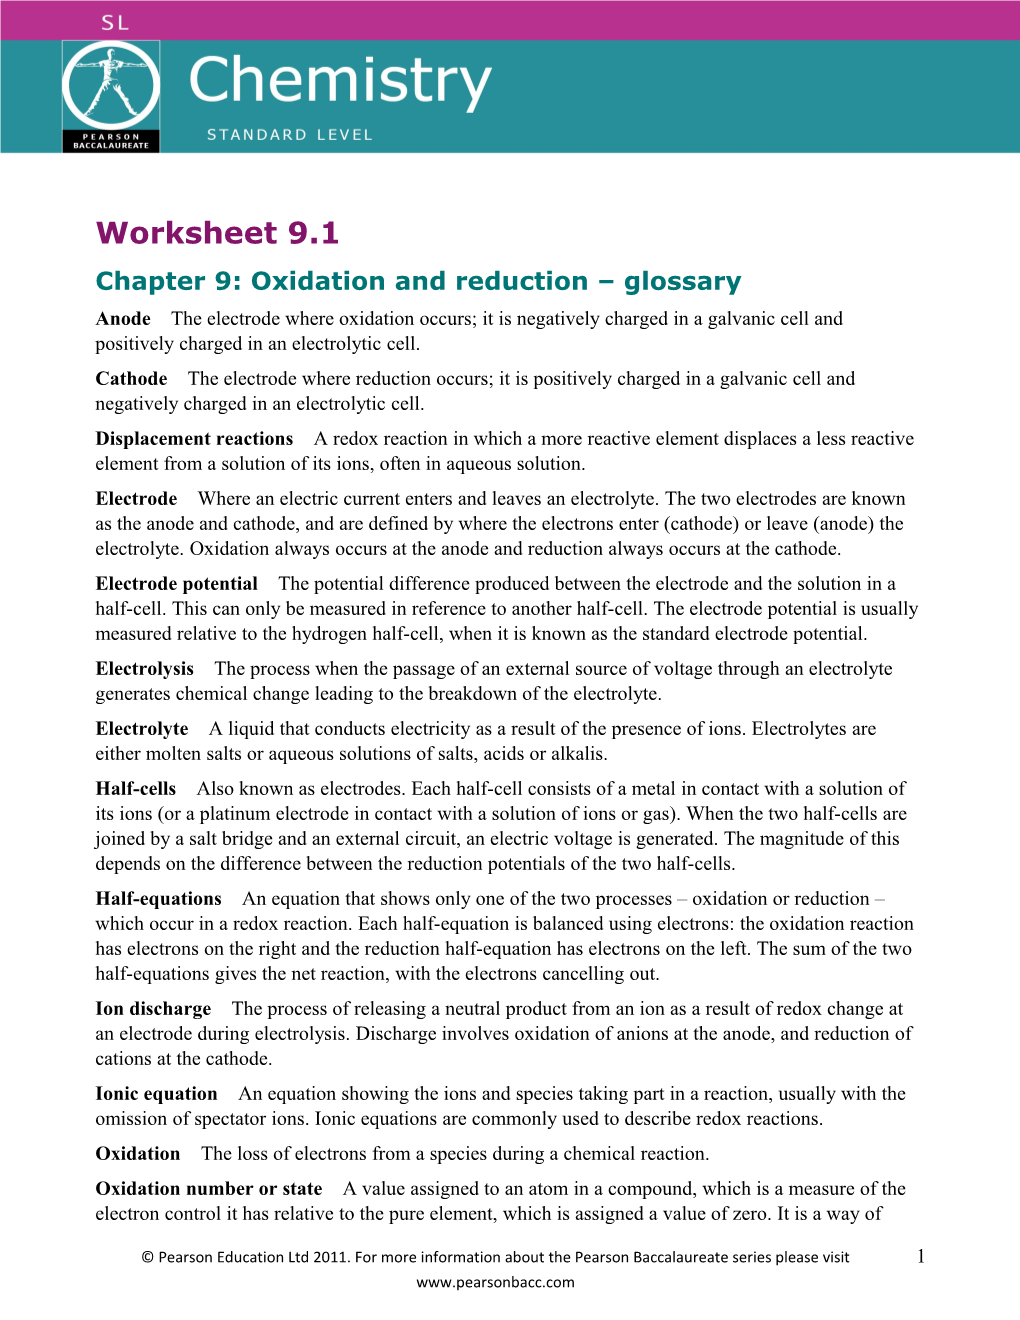 Chapter 9: Oxidation and Reduction Glossary